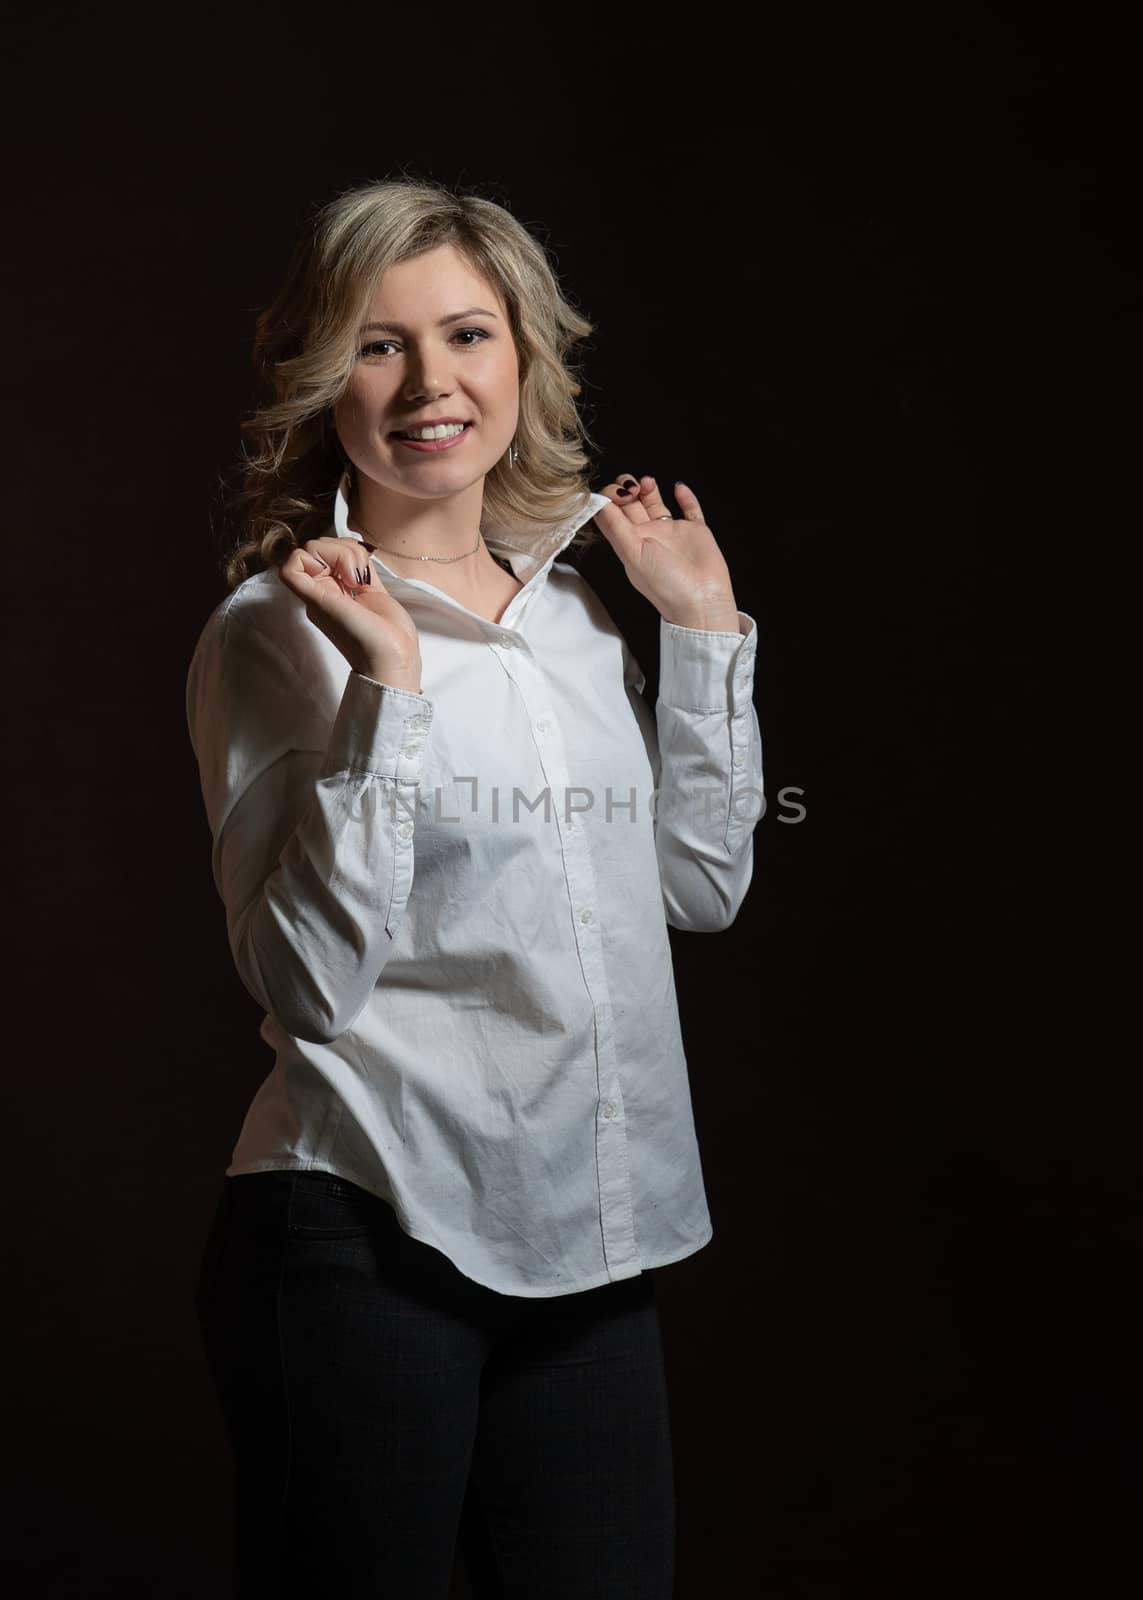 30 years old woman with blond hair in a white shirt posing in the studio on a dark background